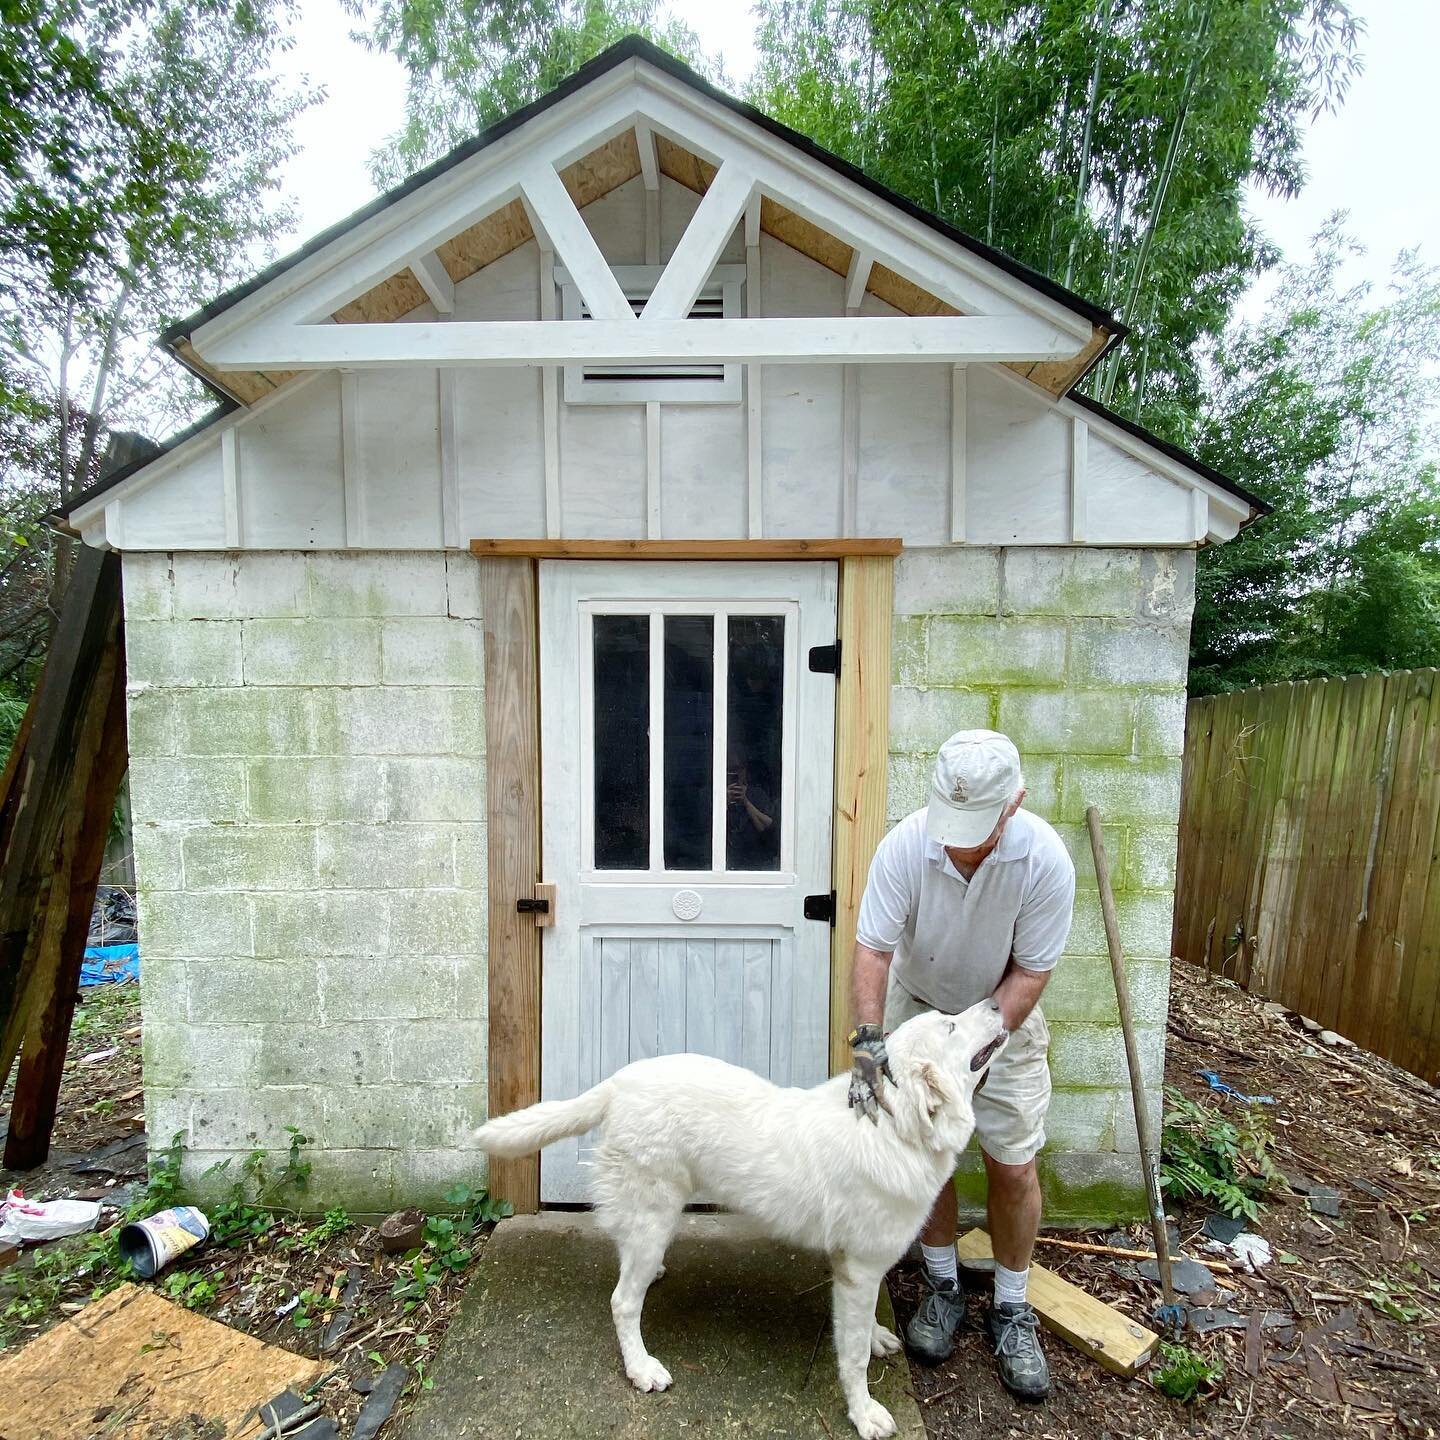 My Dad rebuilt the old shed in my yard. It&rsquo;s like new. Still in process and then painting. 
🌺what color do you think we should paint it?

#underconstruction #gardenshed #dad ##greatpyreneespuppy #greatpyreneesofinstagram #dogsofinstagram #pyrm